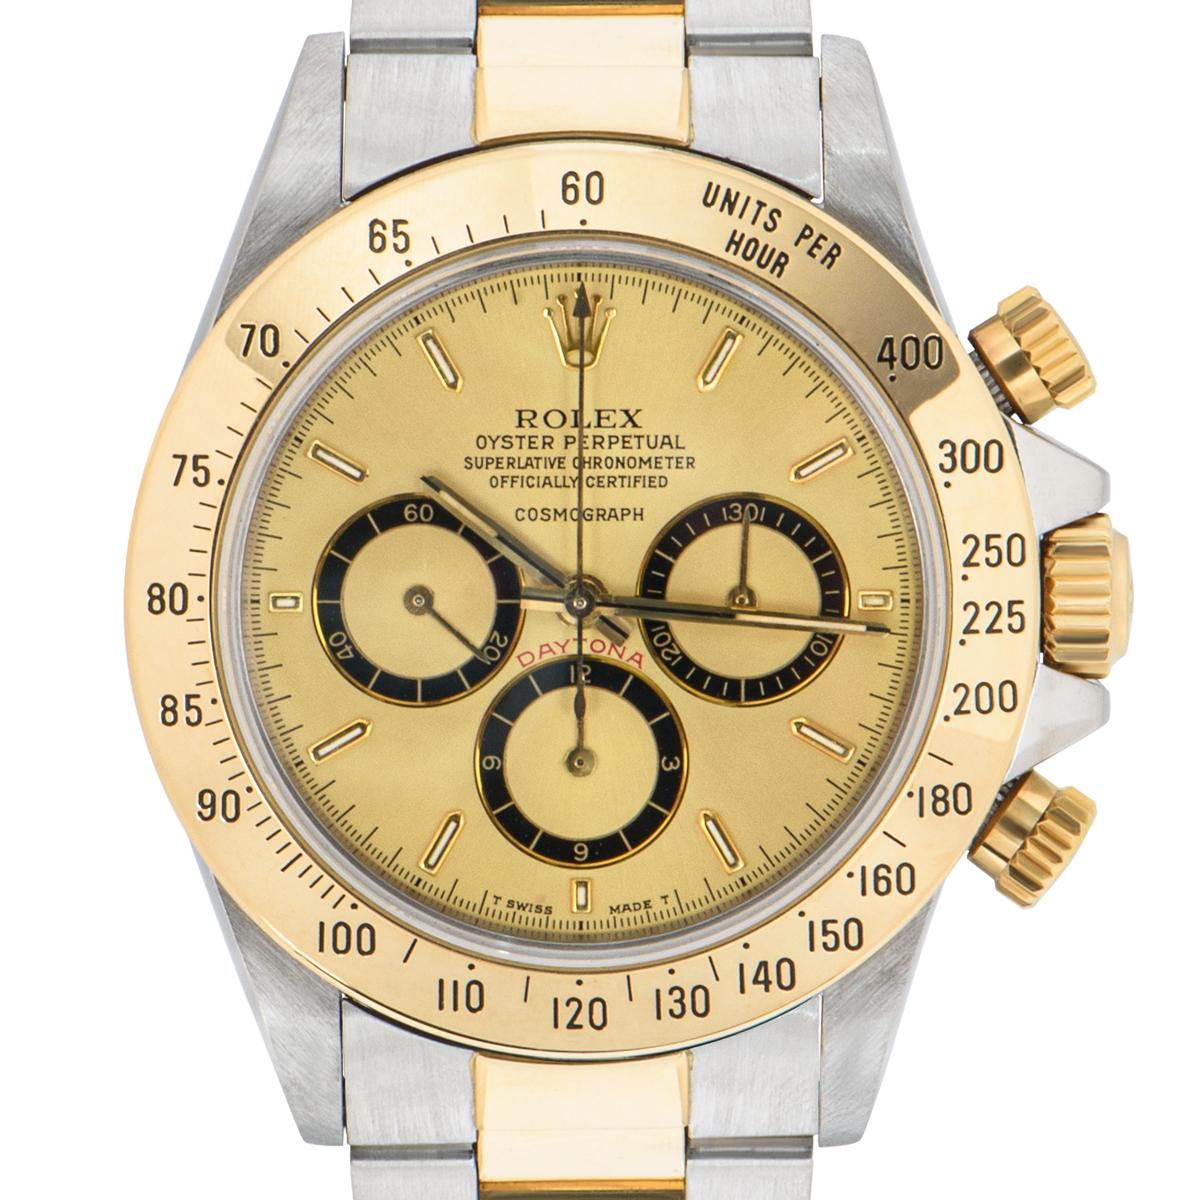 A Rare Stainless Steel and 18k Yellow Gold Oyster Perpetual Zenith Movement Cosmograph Daytona Men's Wristwatch, rare Mark I floating champagne dial with applied hour markers, 30-minute recorder at 30'clock, 12-hour recorder with inverted 6at